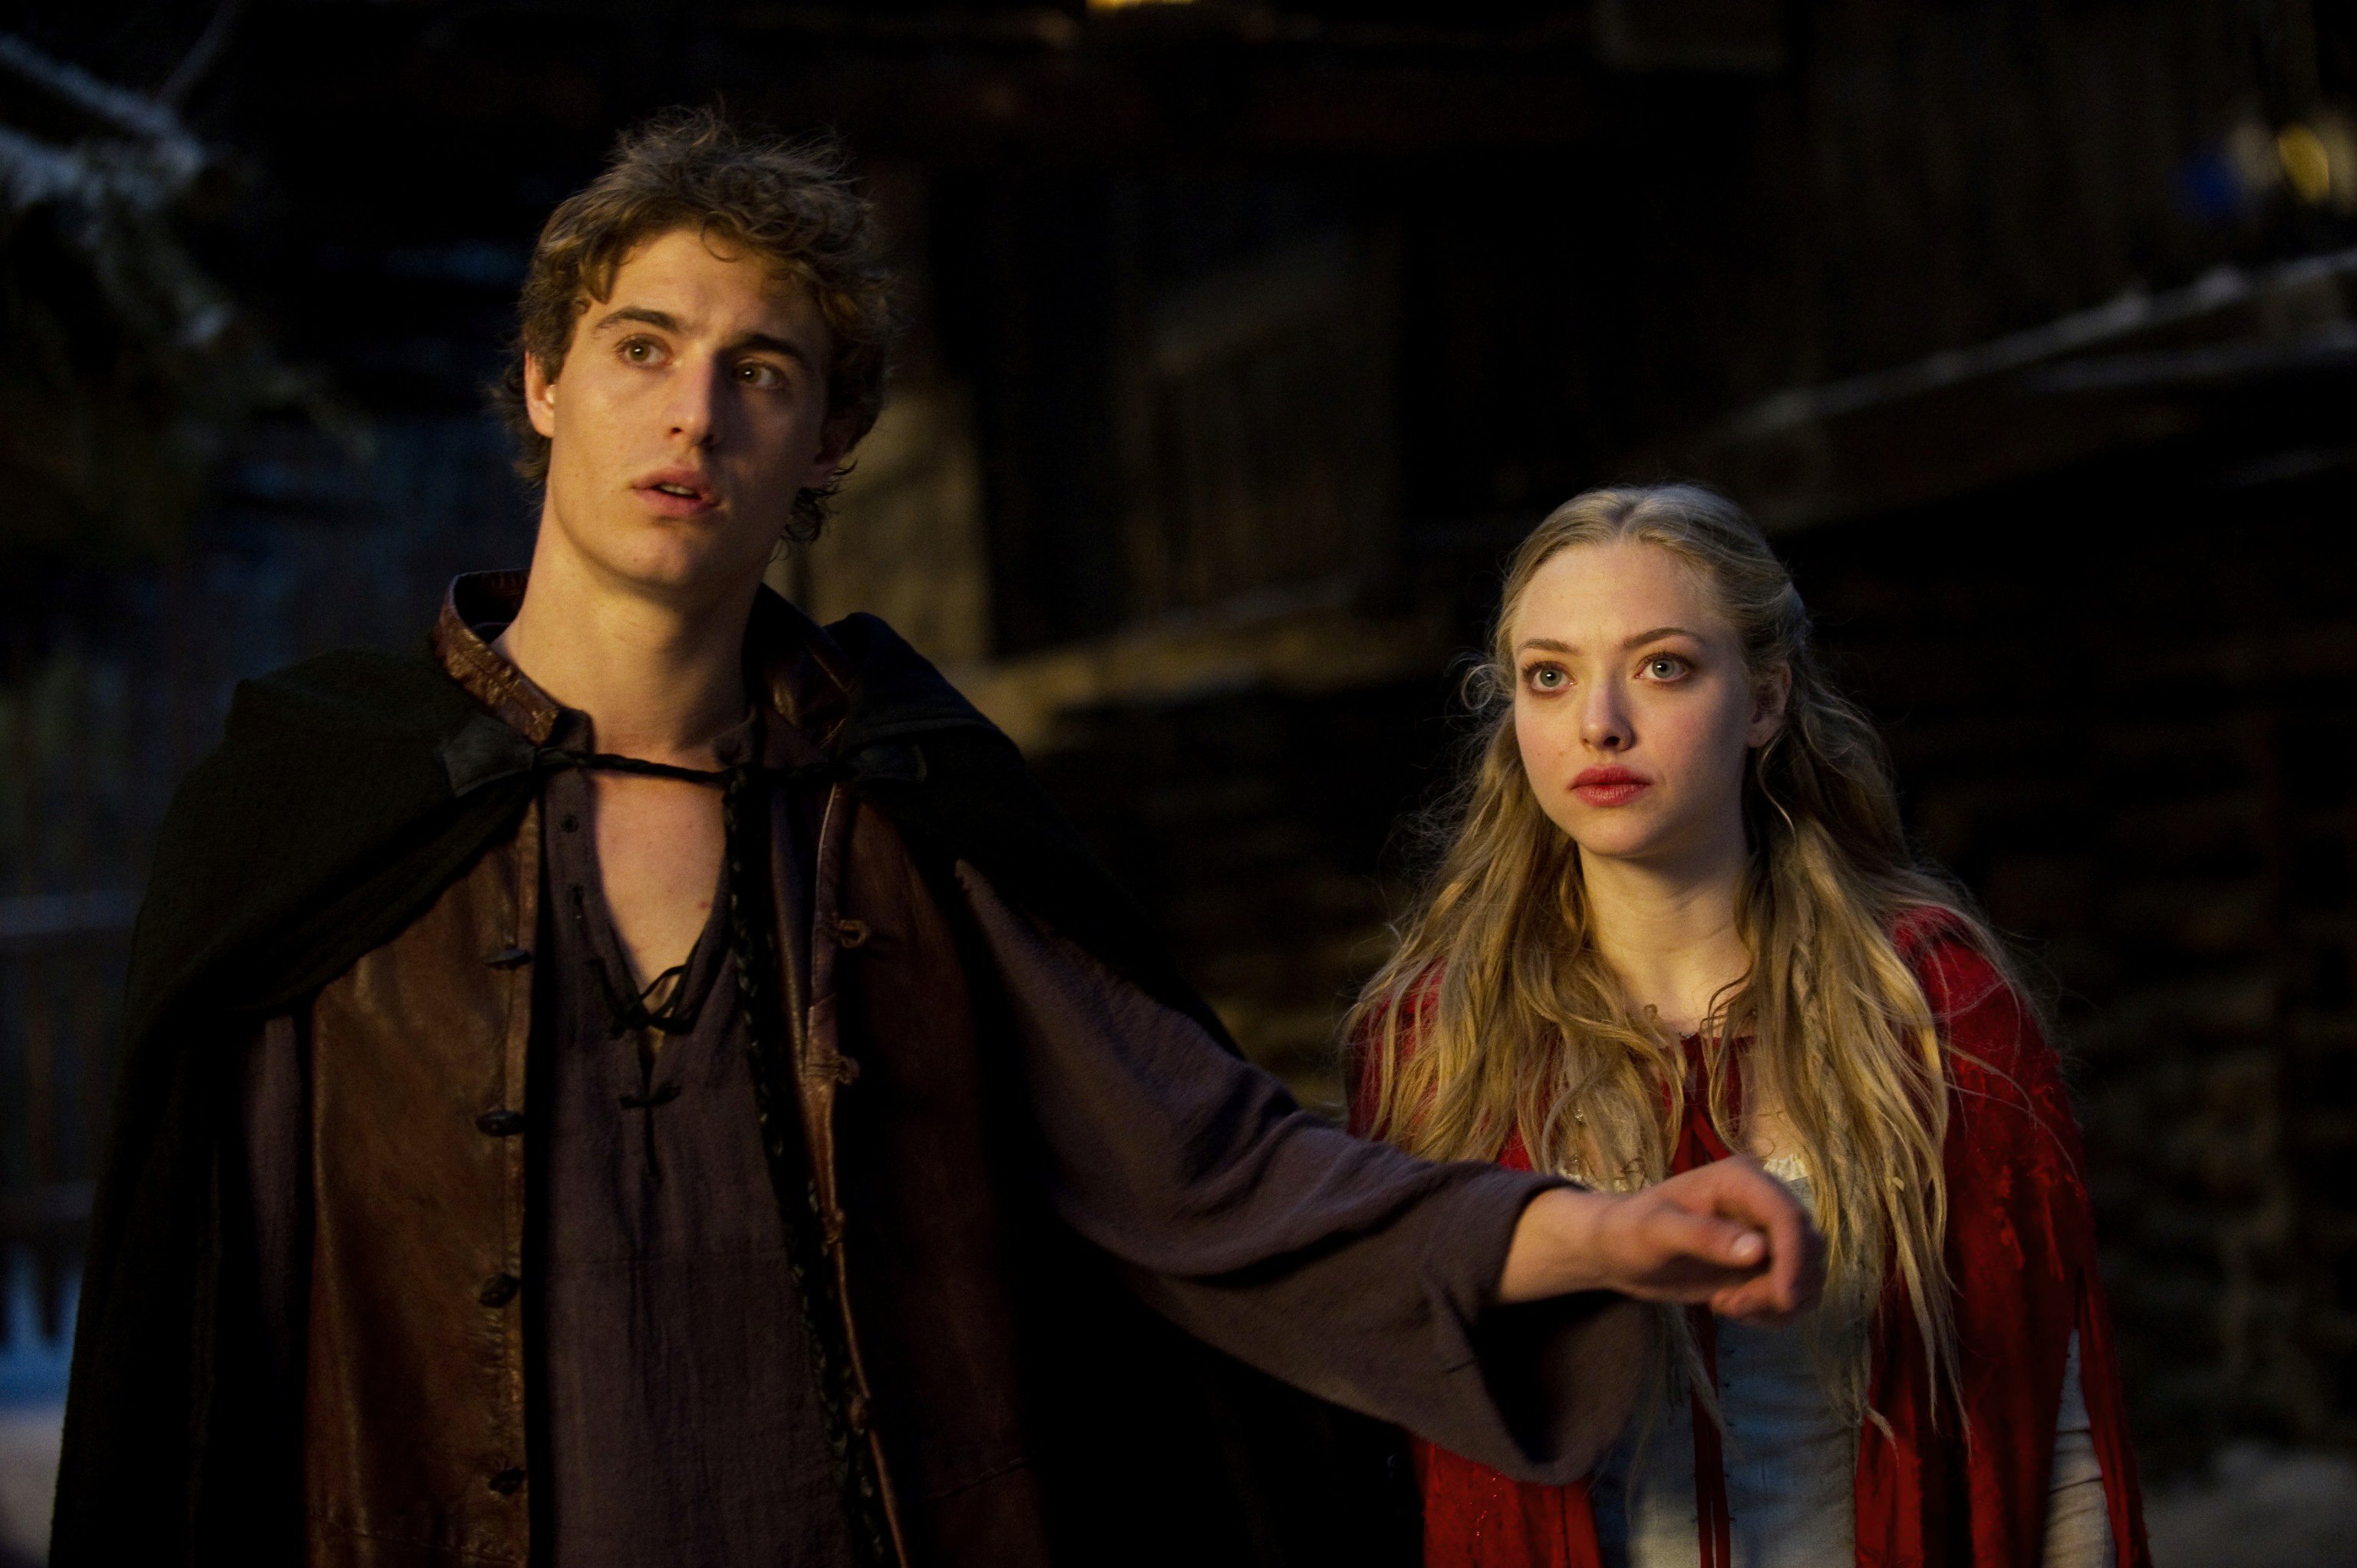 Shiloh Fernandez stars as Peter and Amanda Seyfried stars as Valerie in Warner Bros. Pictures' Red Riding Hood (2011)